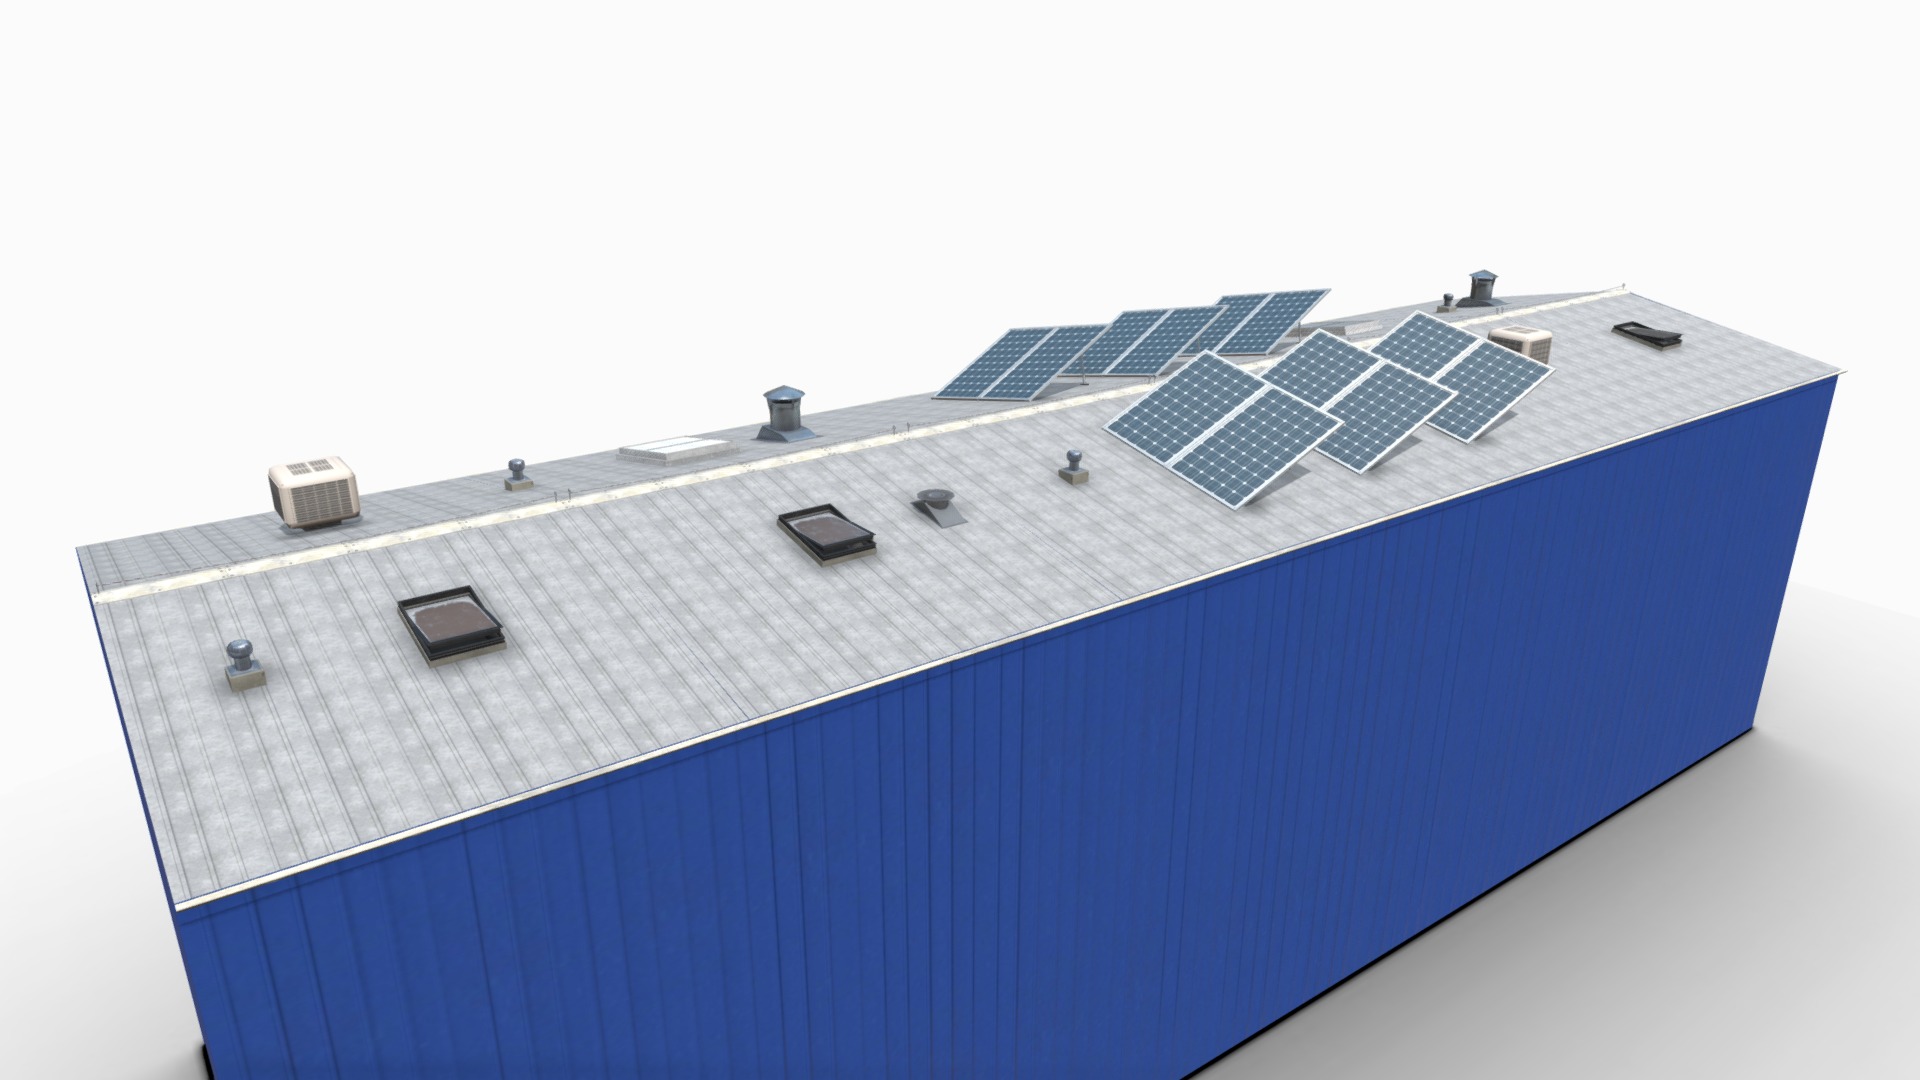 3D model Industrial Roof elements - This is a 3D model of the Industrial Roof elements. The 3D model is about a blue building with solar panels.